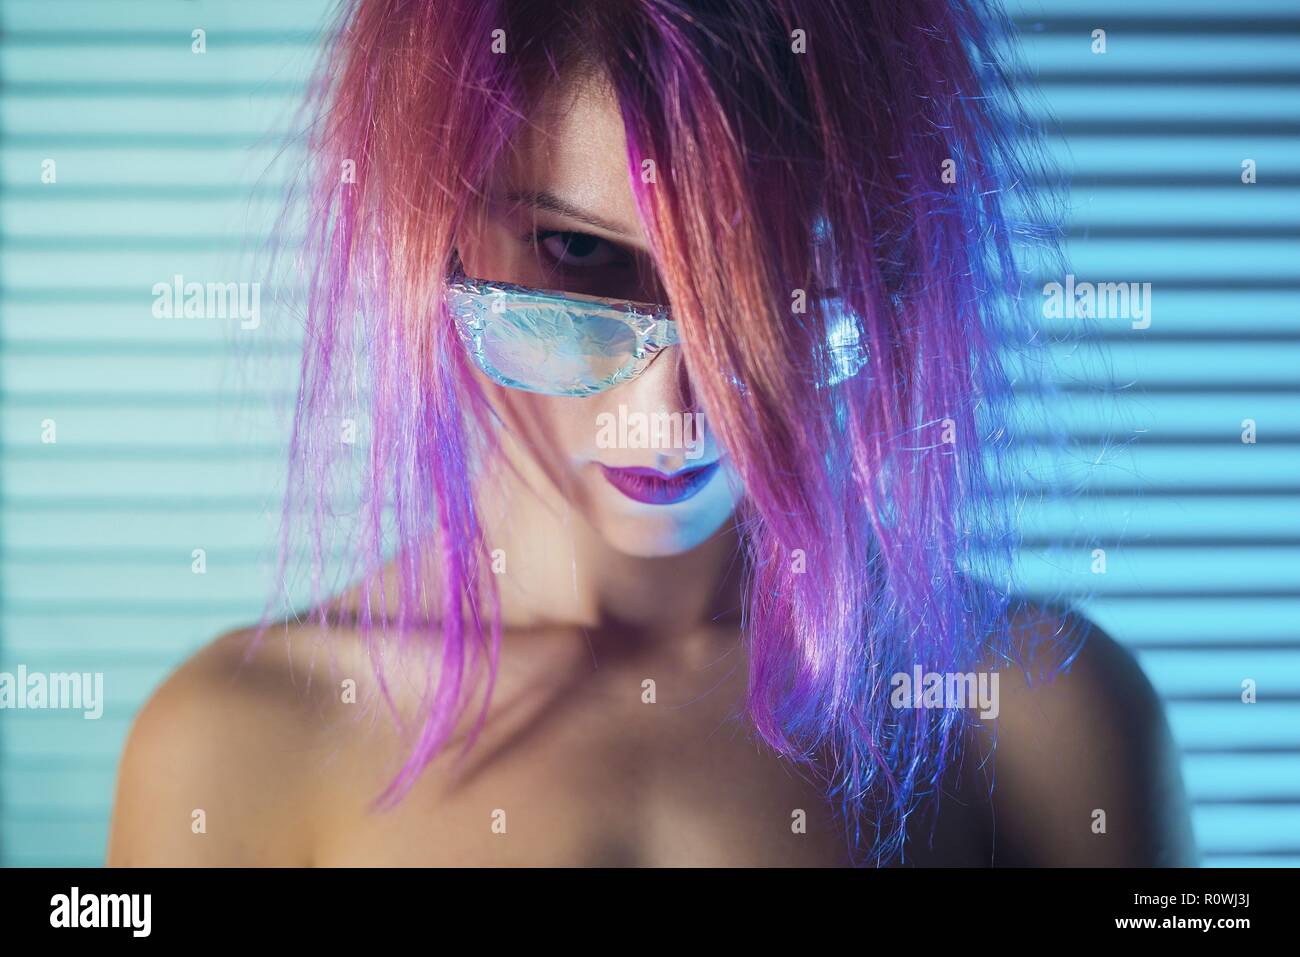 Young woman with pink hair futuristic portrait with metallic shades Stock Photo